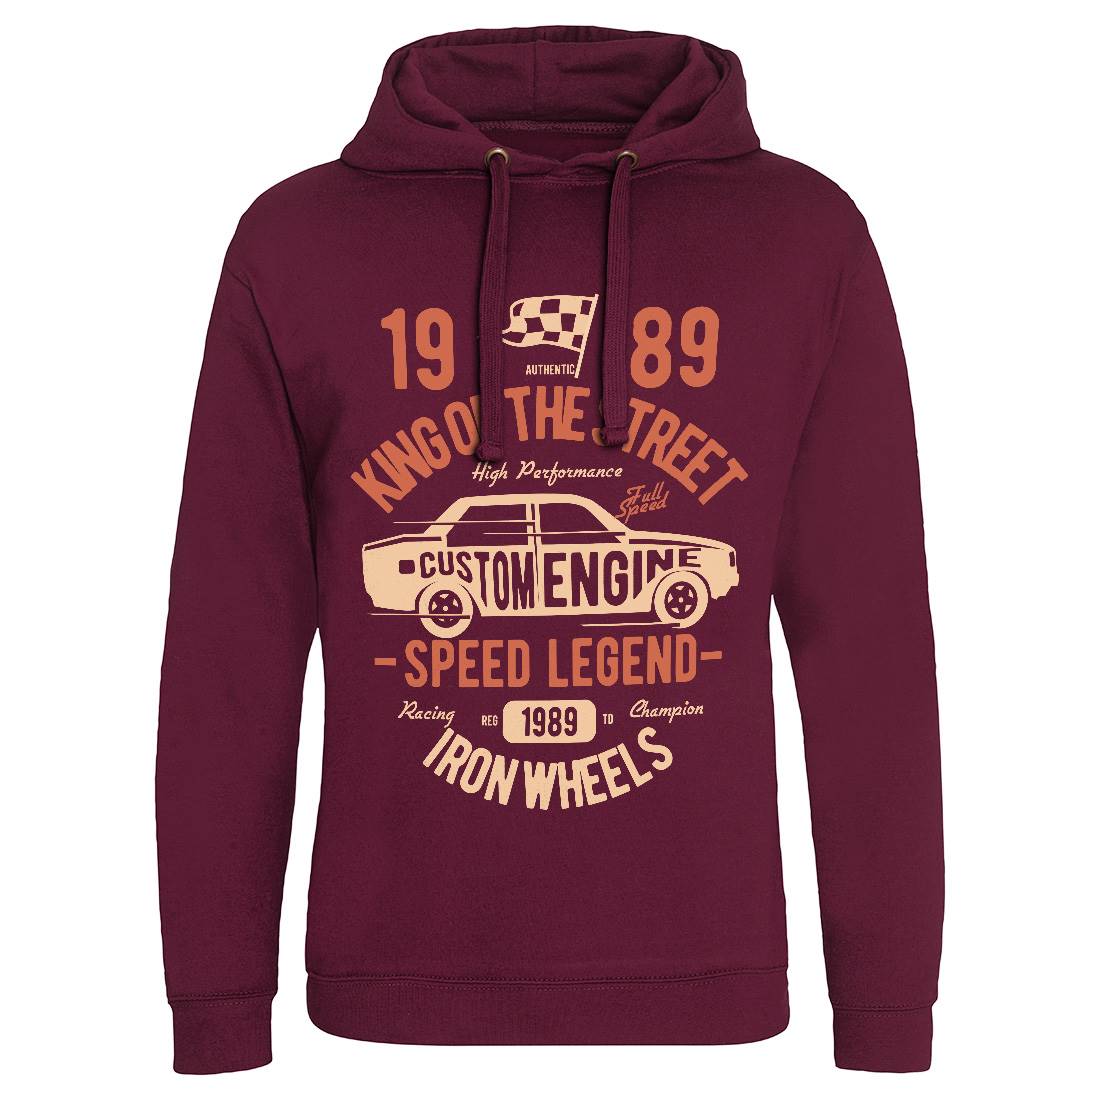 King Of The Street Mens Hoodie Without Pocket Cars B413